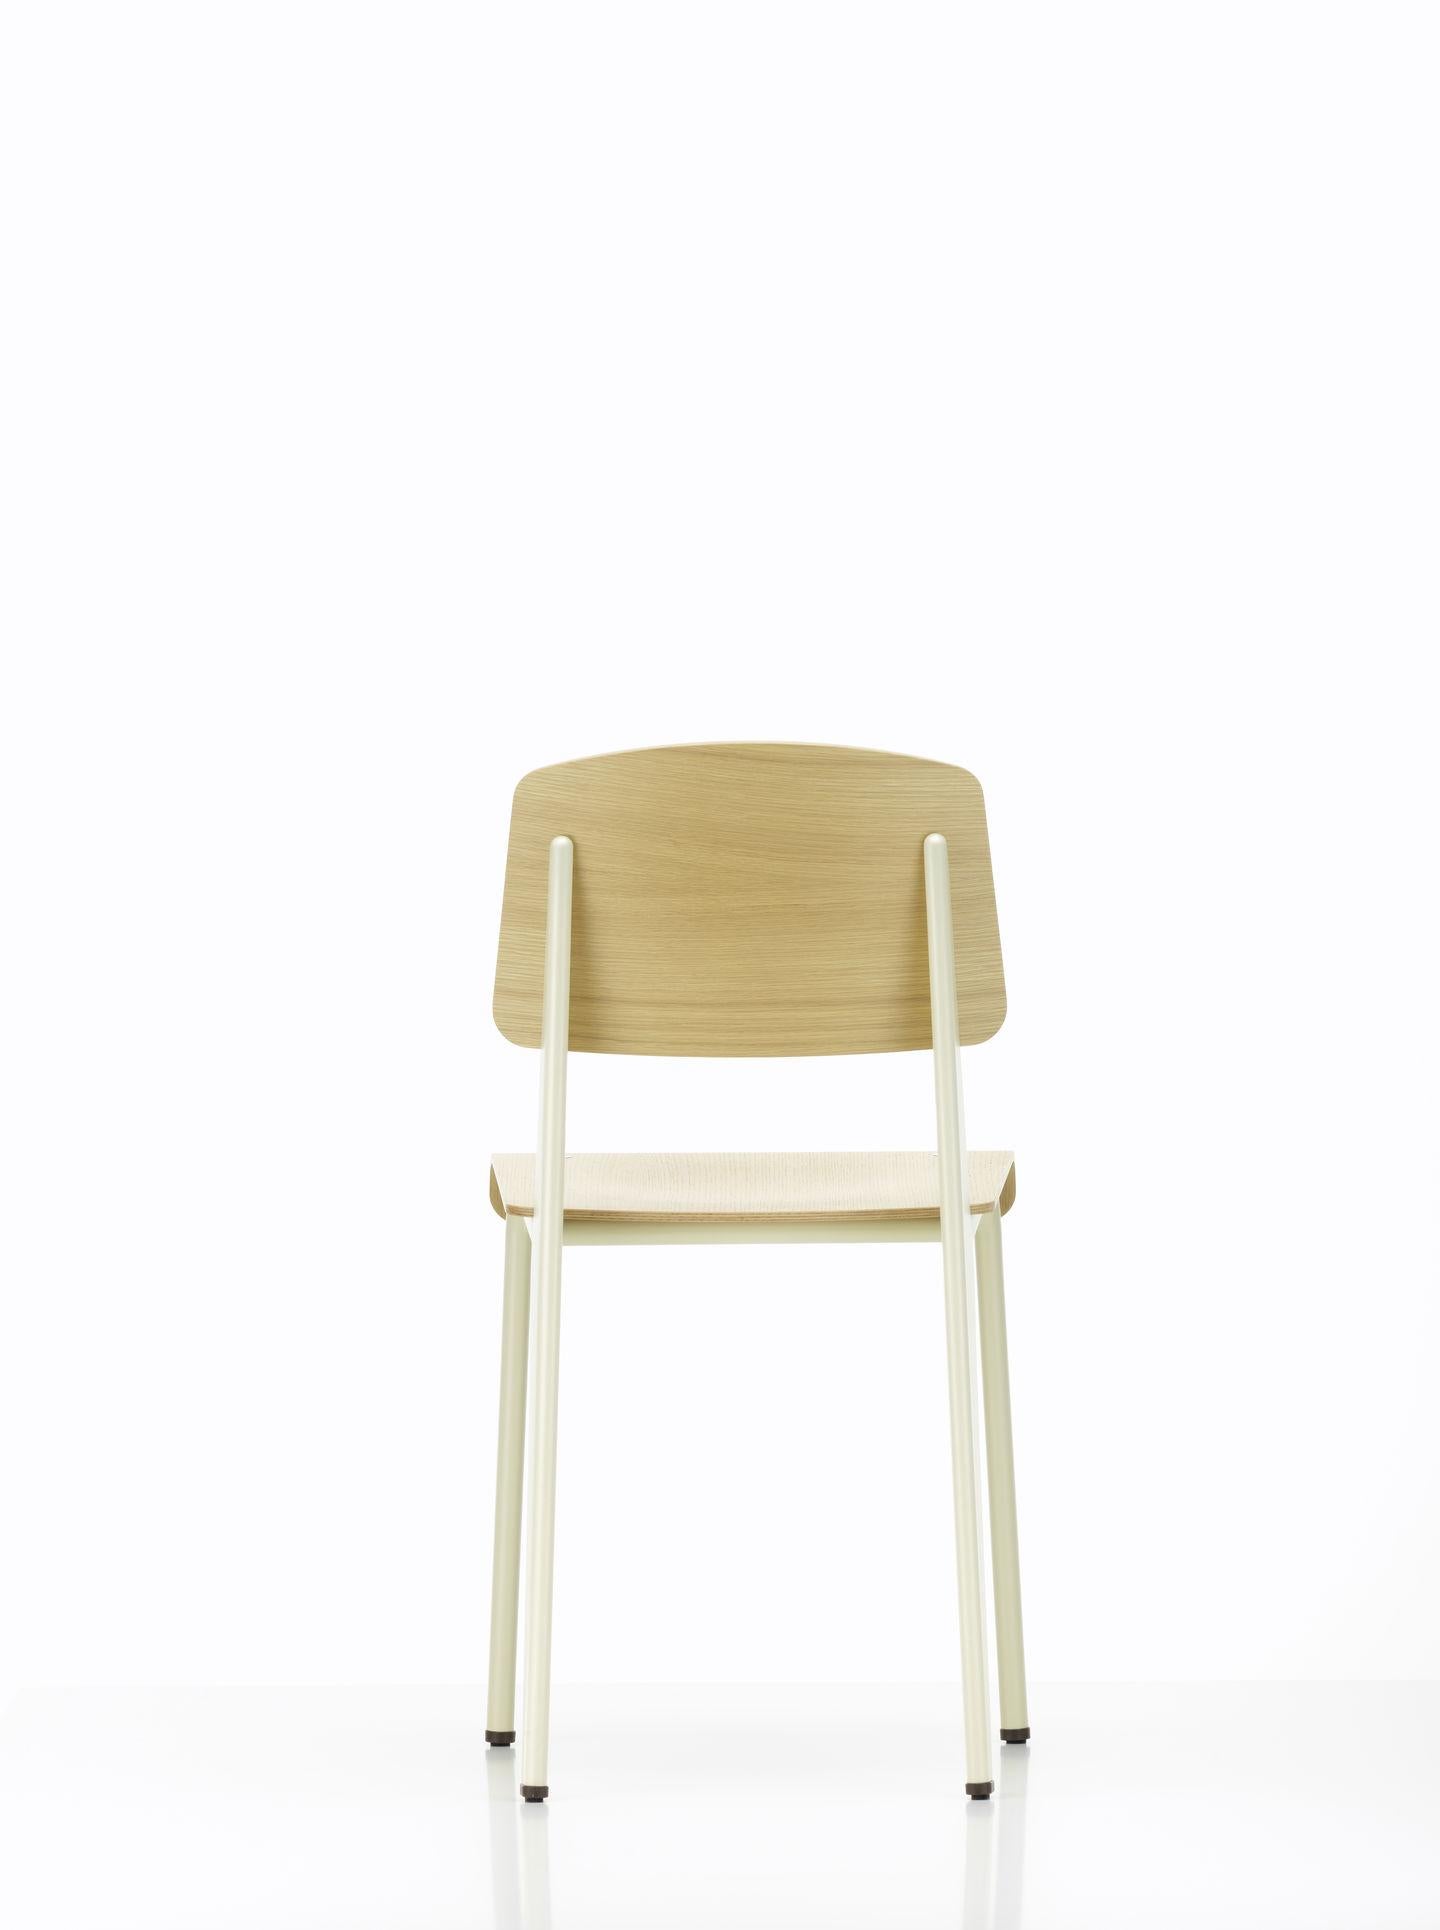 Swiss Jean Prouvé Standard Chair by Vitra